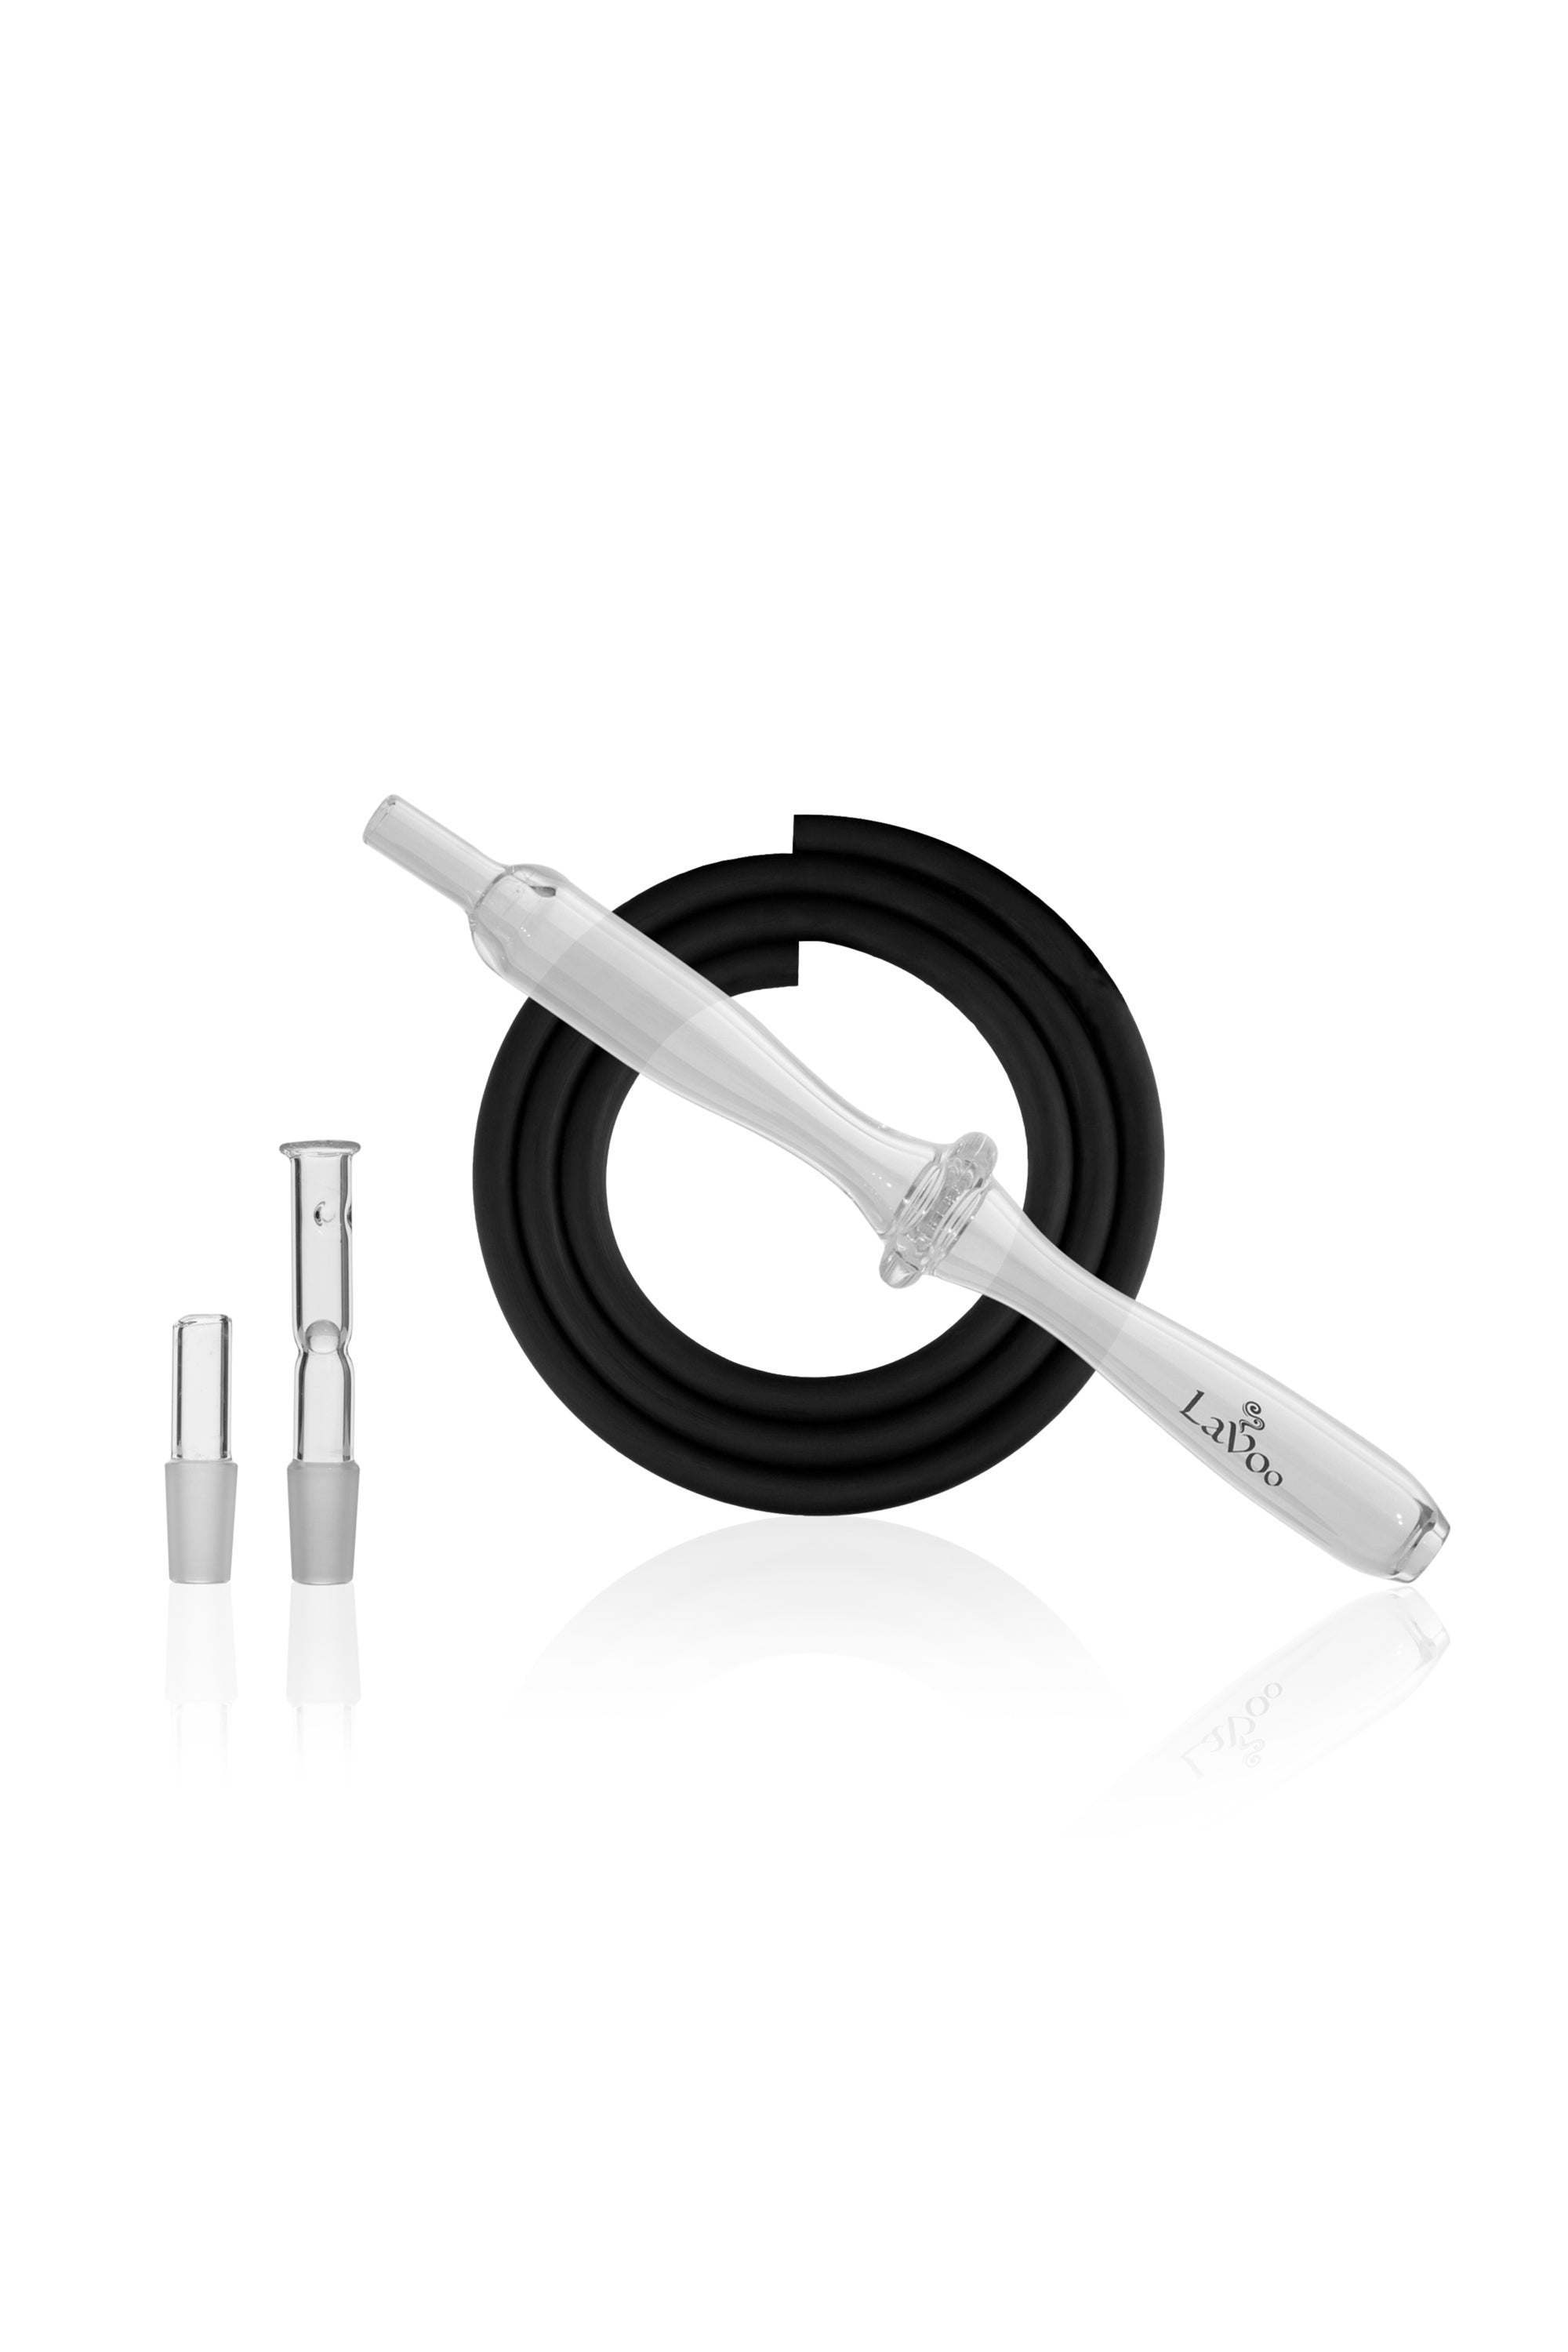 Lavoo Hookah MP1 Lux | Stogz | Find Your High